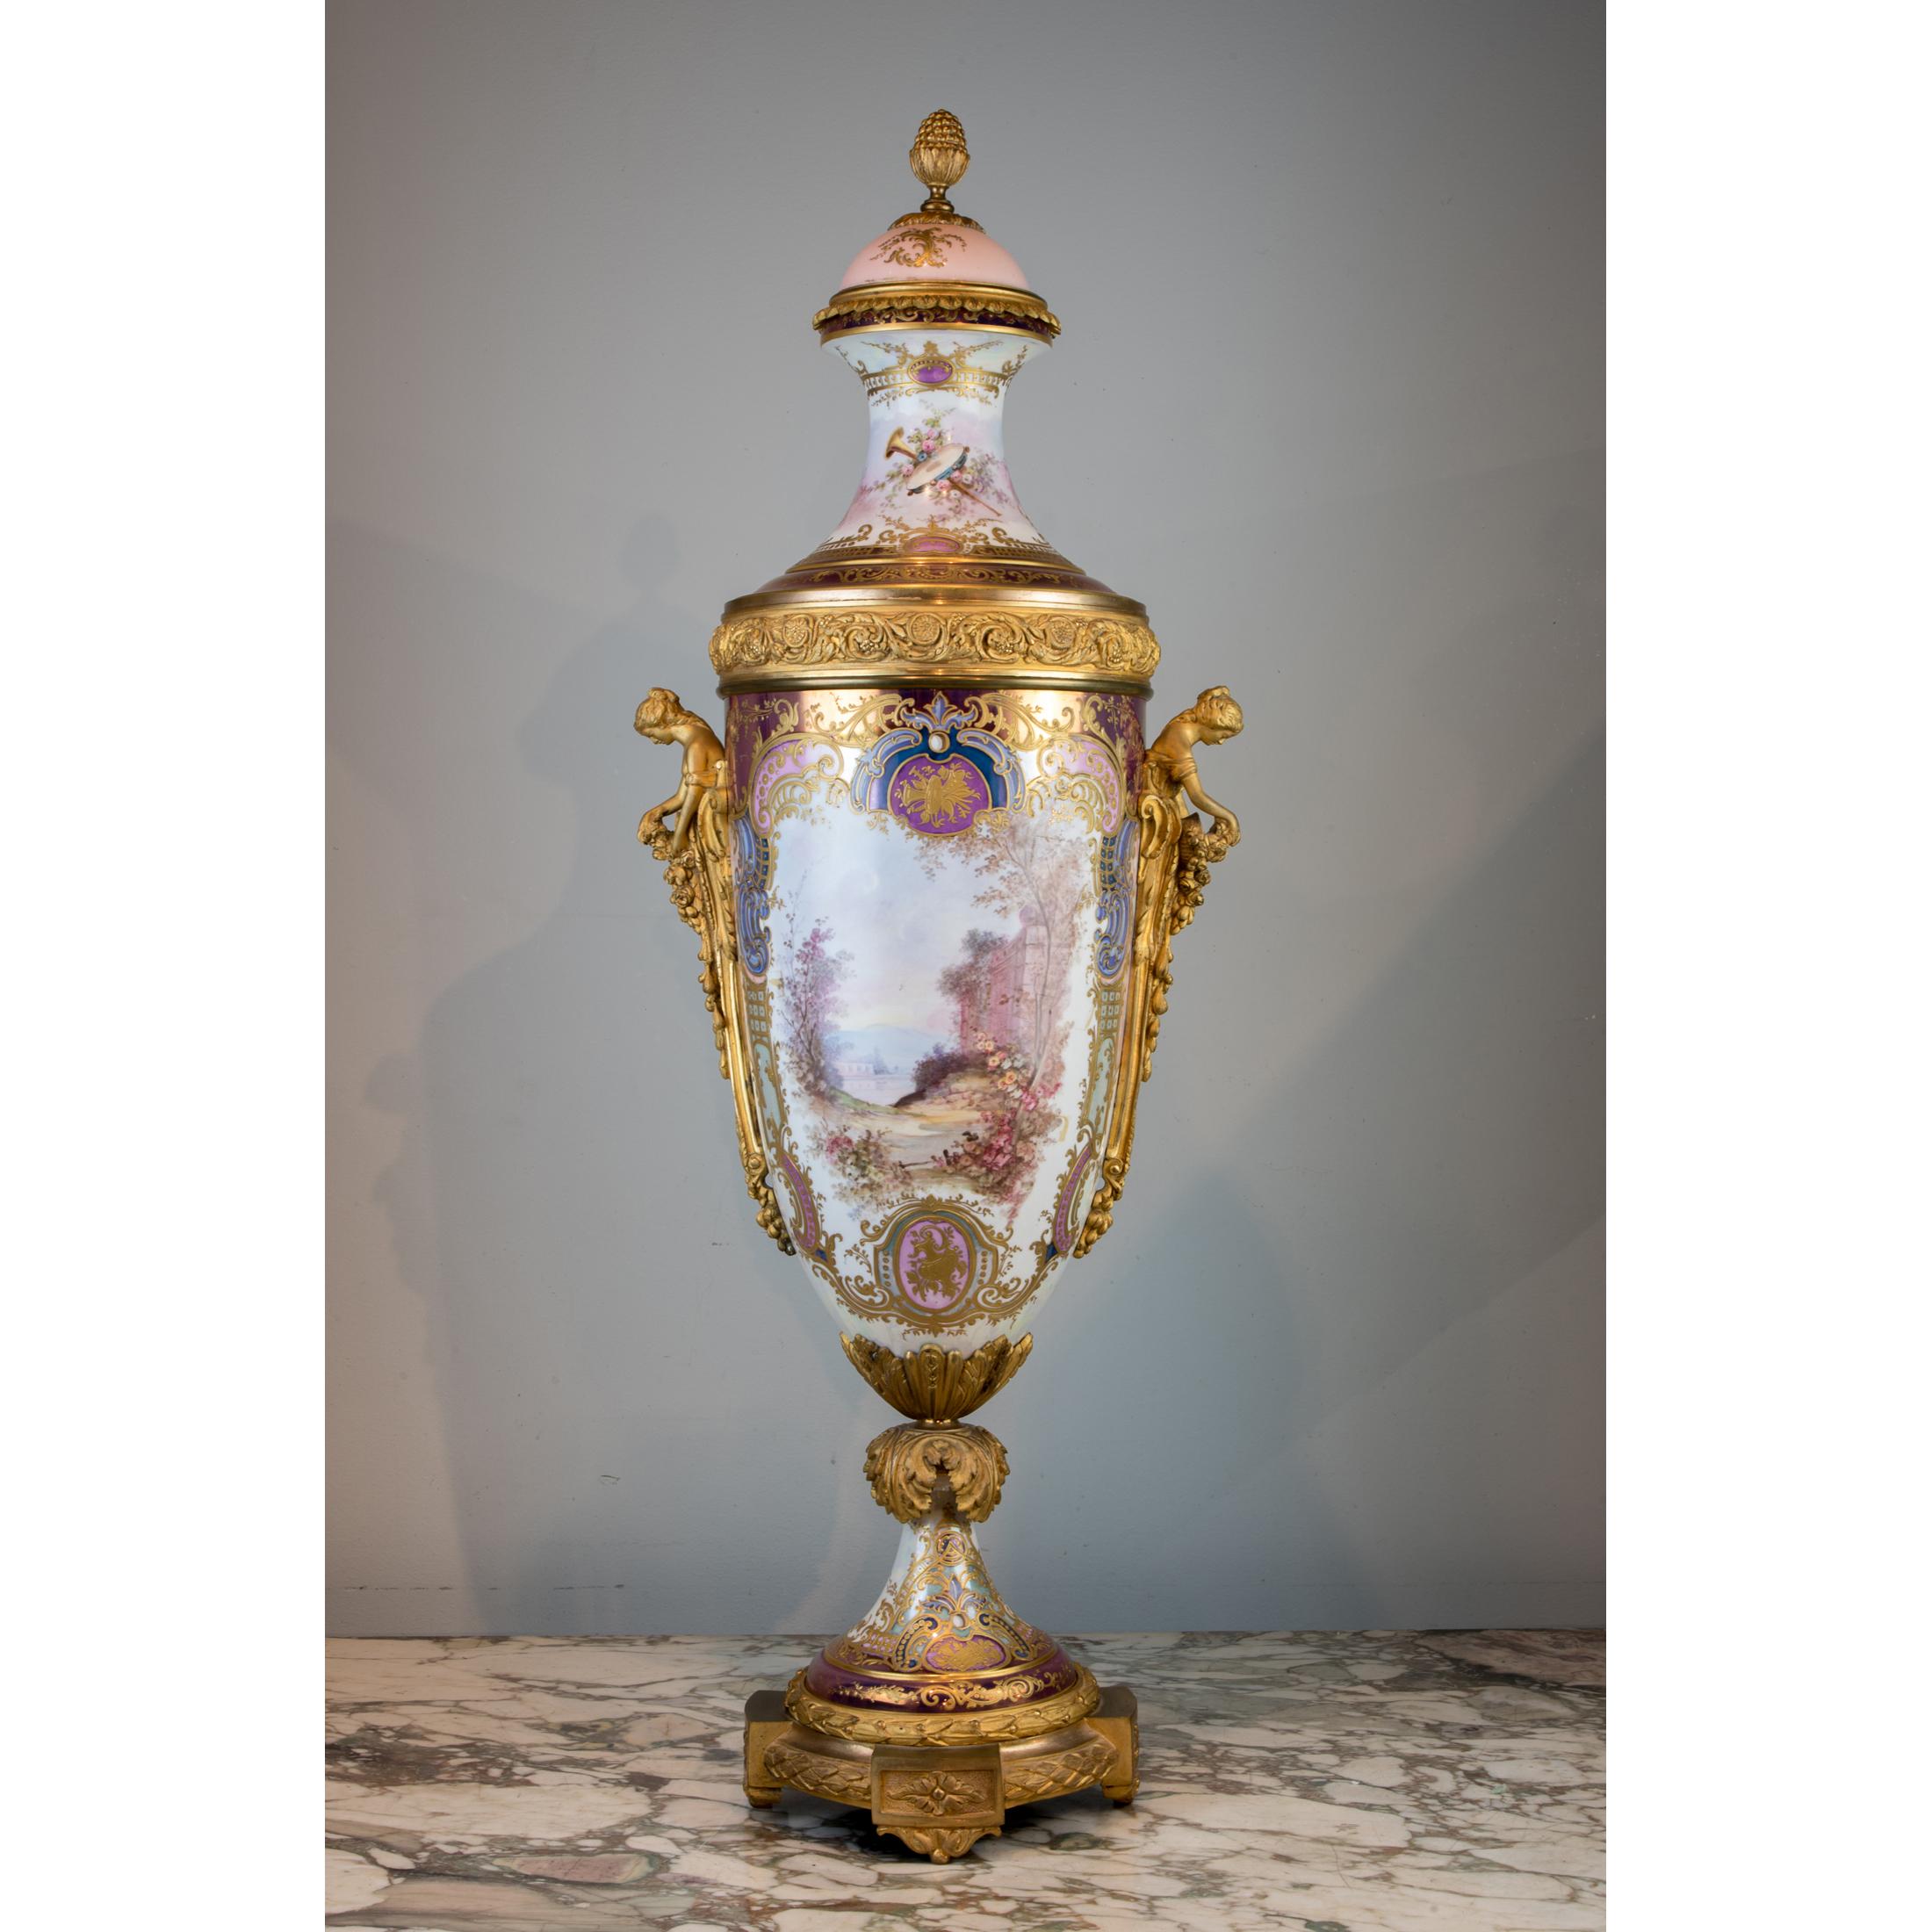 The stunning Sèvres style raised gilt and gilt bronze mounted porcelain pink iridescent glaze portrait vase painted with a beautiful woman with cupid. 

Date: 19th century
Origin: French
Dimension: 34 in. x 12 in.